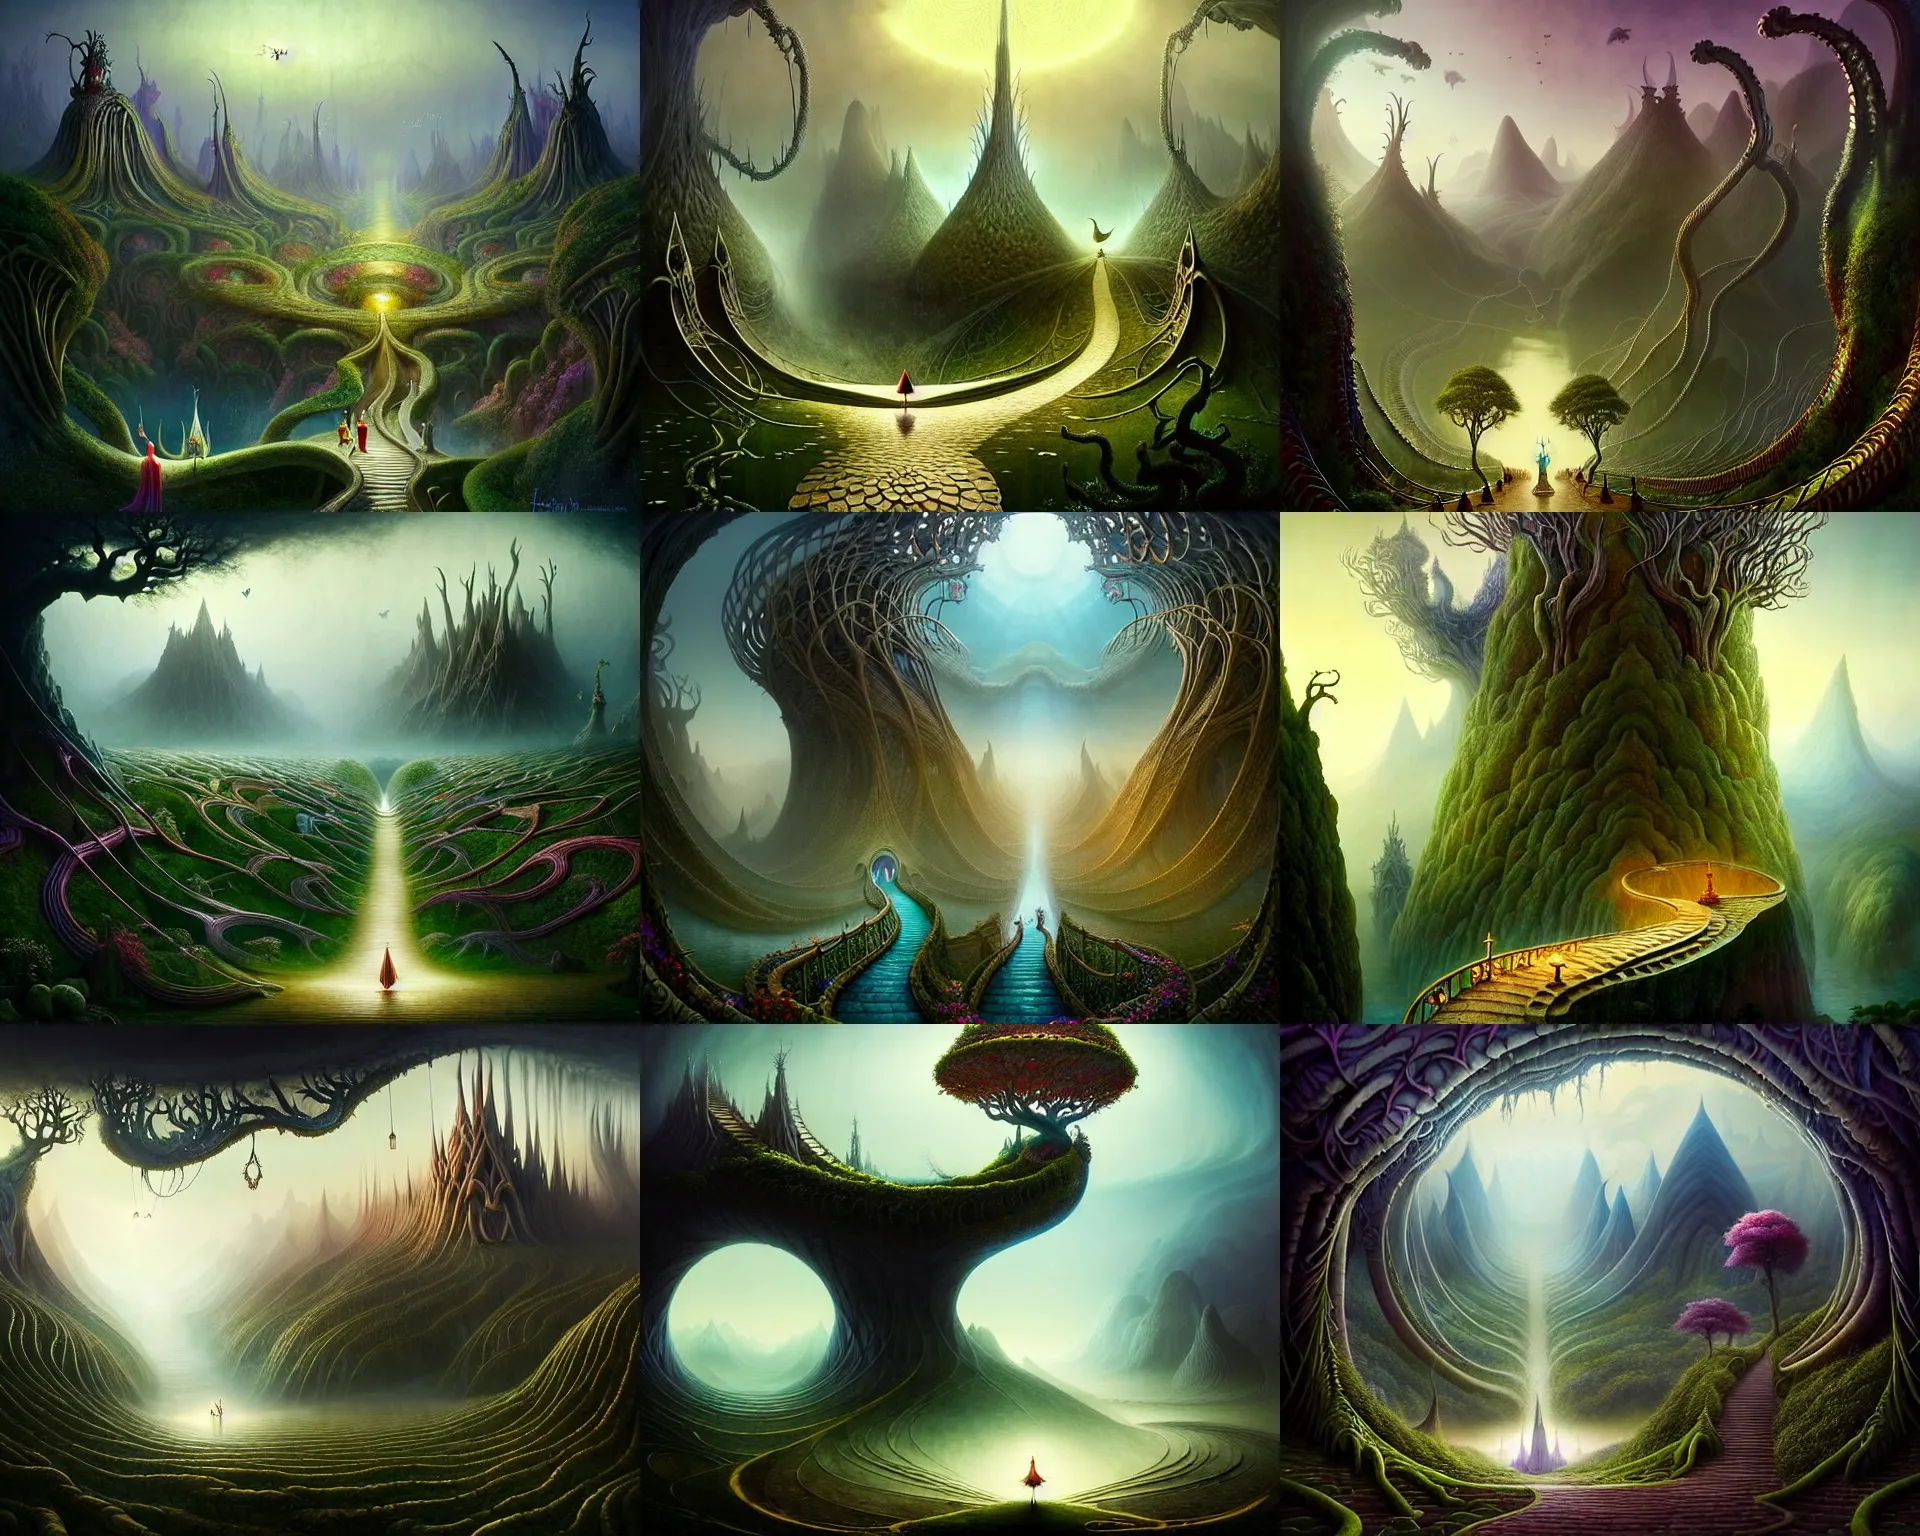 Prompt: a beguiling epic stunning beautiful and insanely detailed matte painting of the impossible winding path through the dark elven kingdom with surreal architecture designed by Heironymous Bosch, mega structures inspired by Heironymous Bosch's Garden of Earthly Delights, vast surreal landscape and horizon by Asher Durand and Cyril Rolando and Natalie Shau, masterpiece!!!, grand!, imaginative!!!, whimsical!!, epic scale, intricate details, sense of awe, elite, wonder, insanely complex, masterful composition!!!, sharp focus, fantasy realism, dramatic lighting